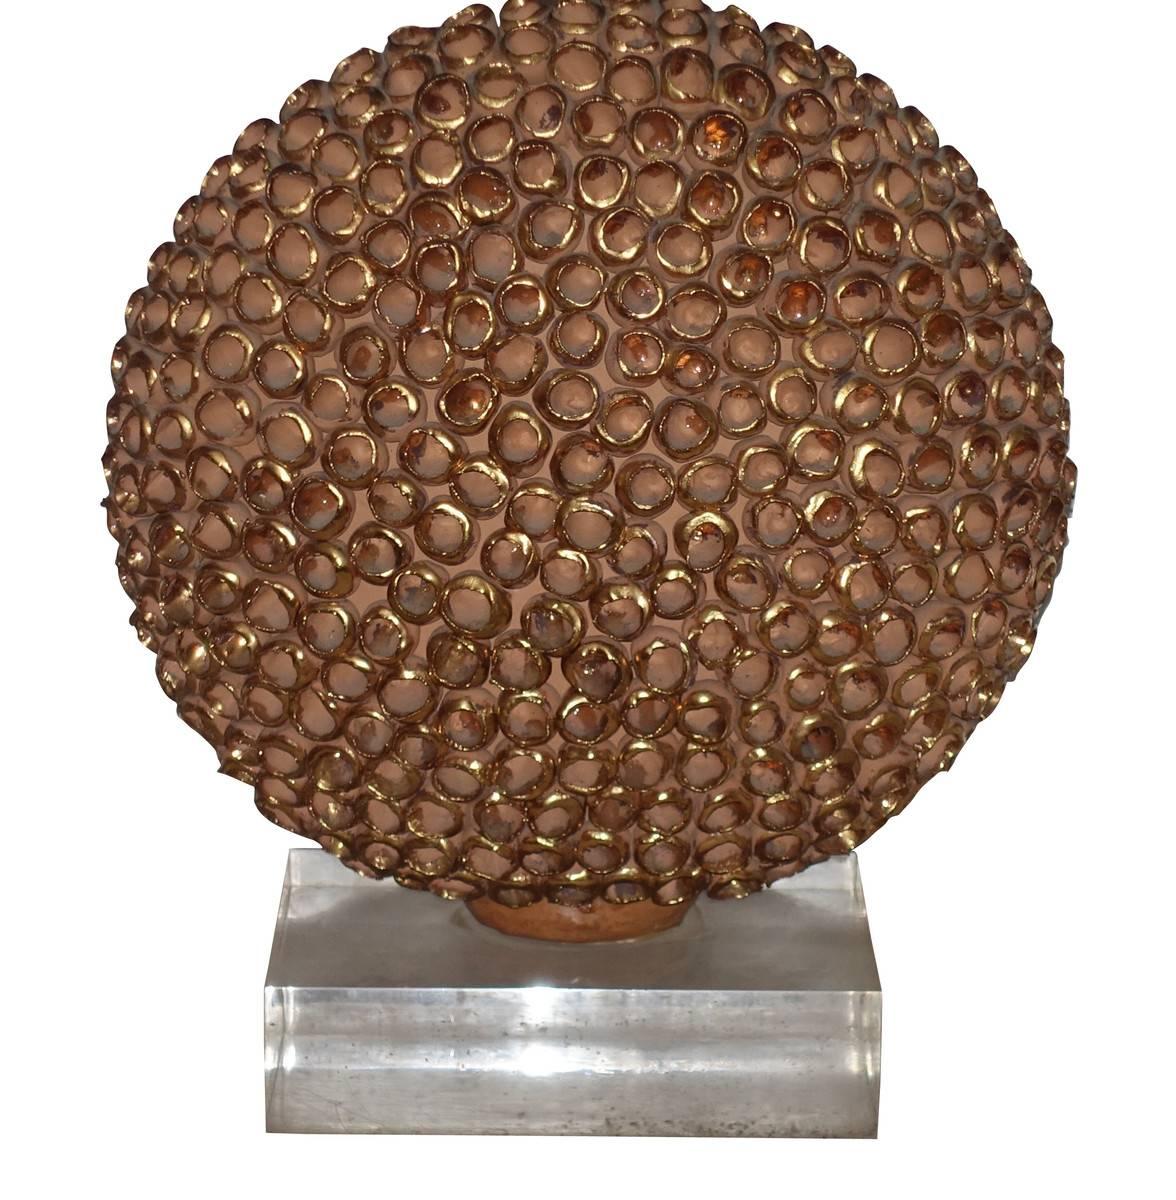 Contemporary French terracotta sphere with textured gold leaf decorative surface single lamp.
Measures: Lucite base measures 9.5